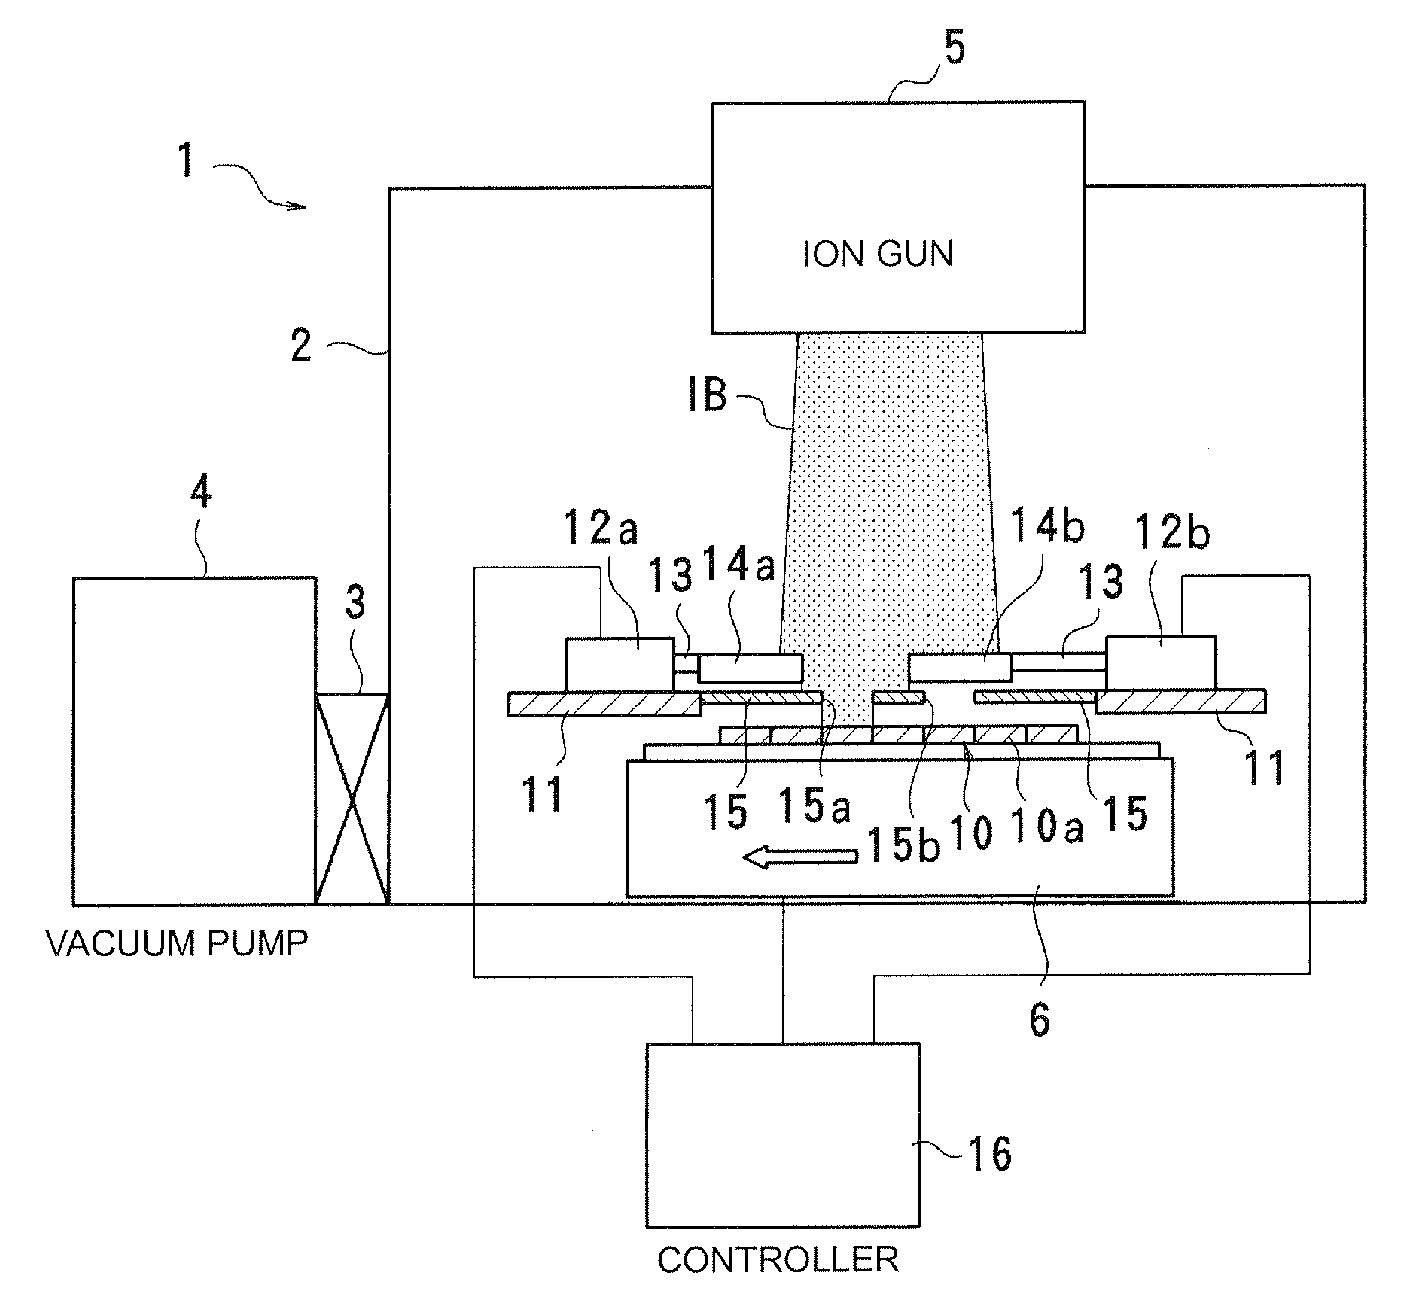 Frequency adjusting apparatus